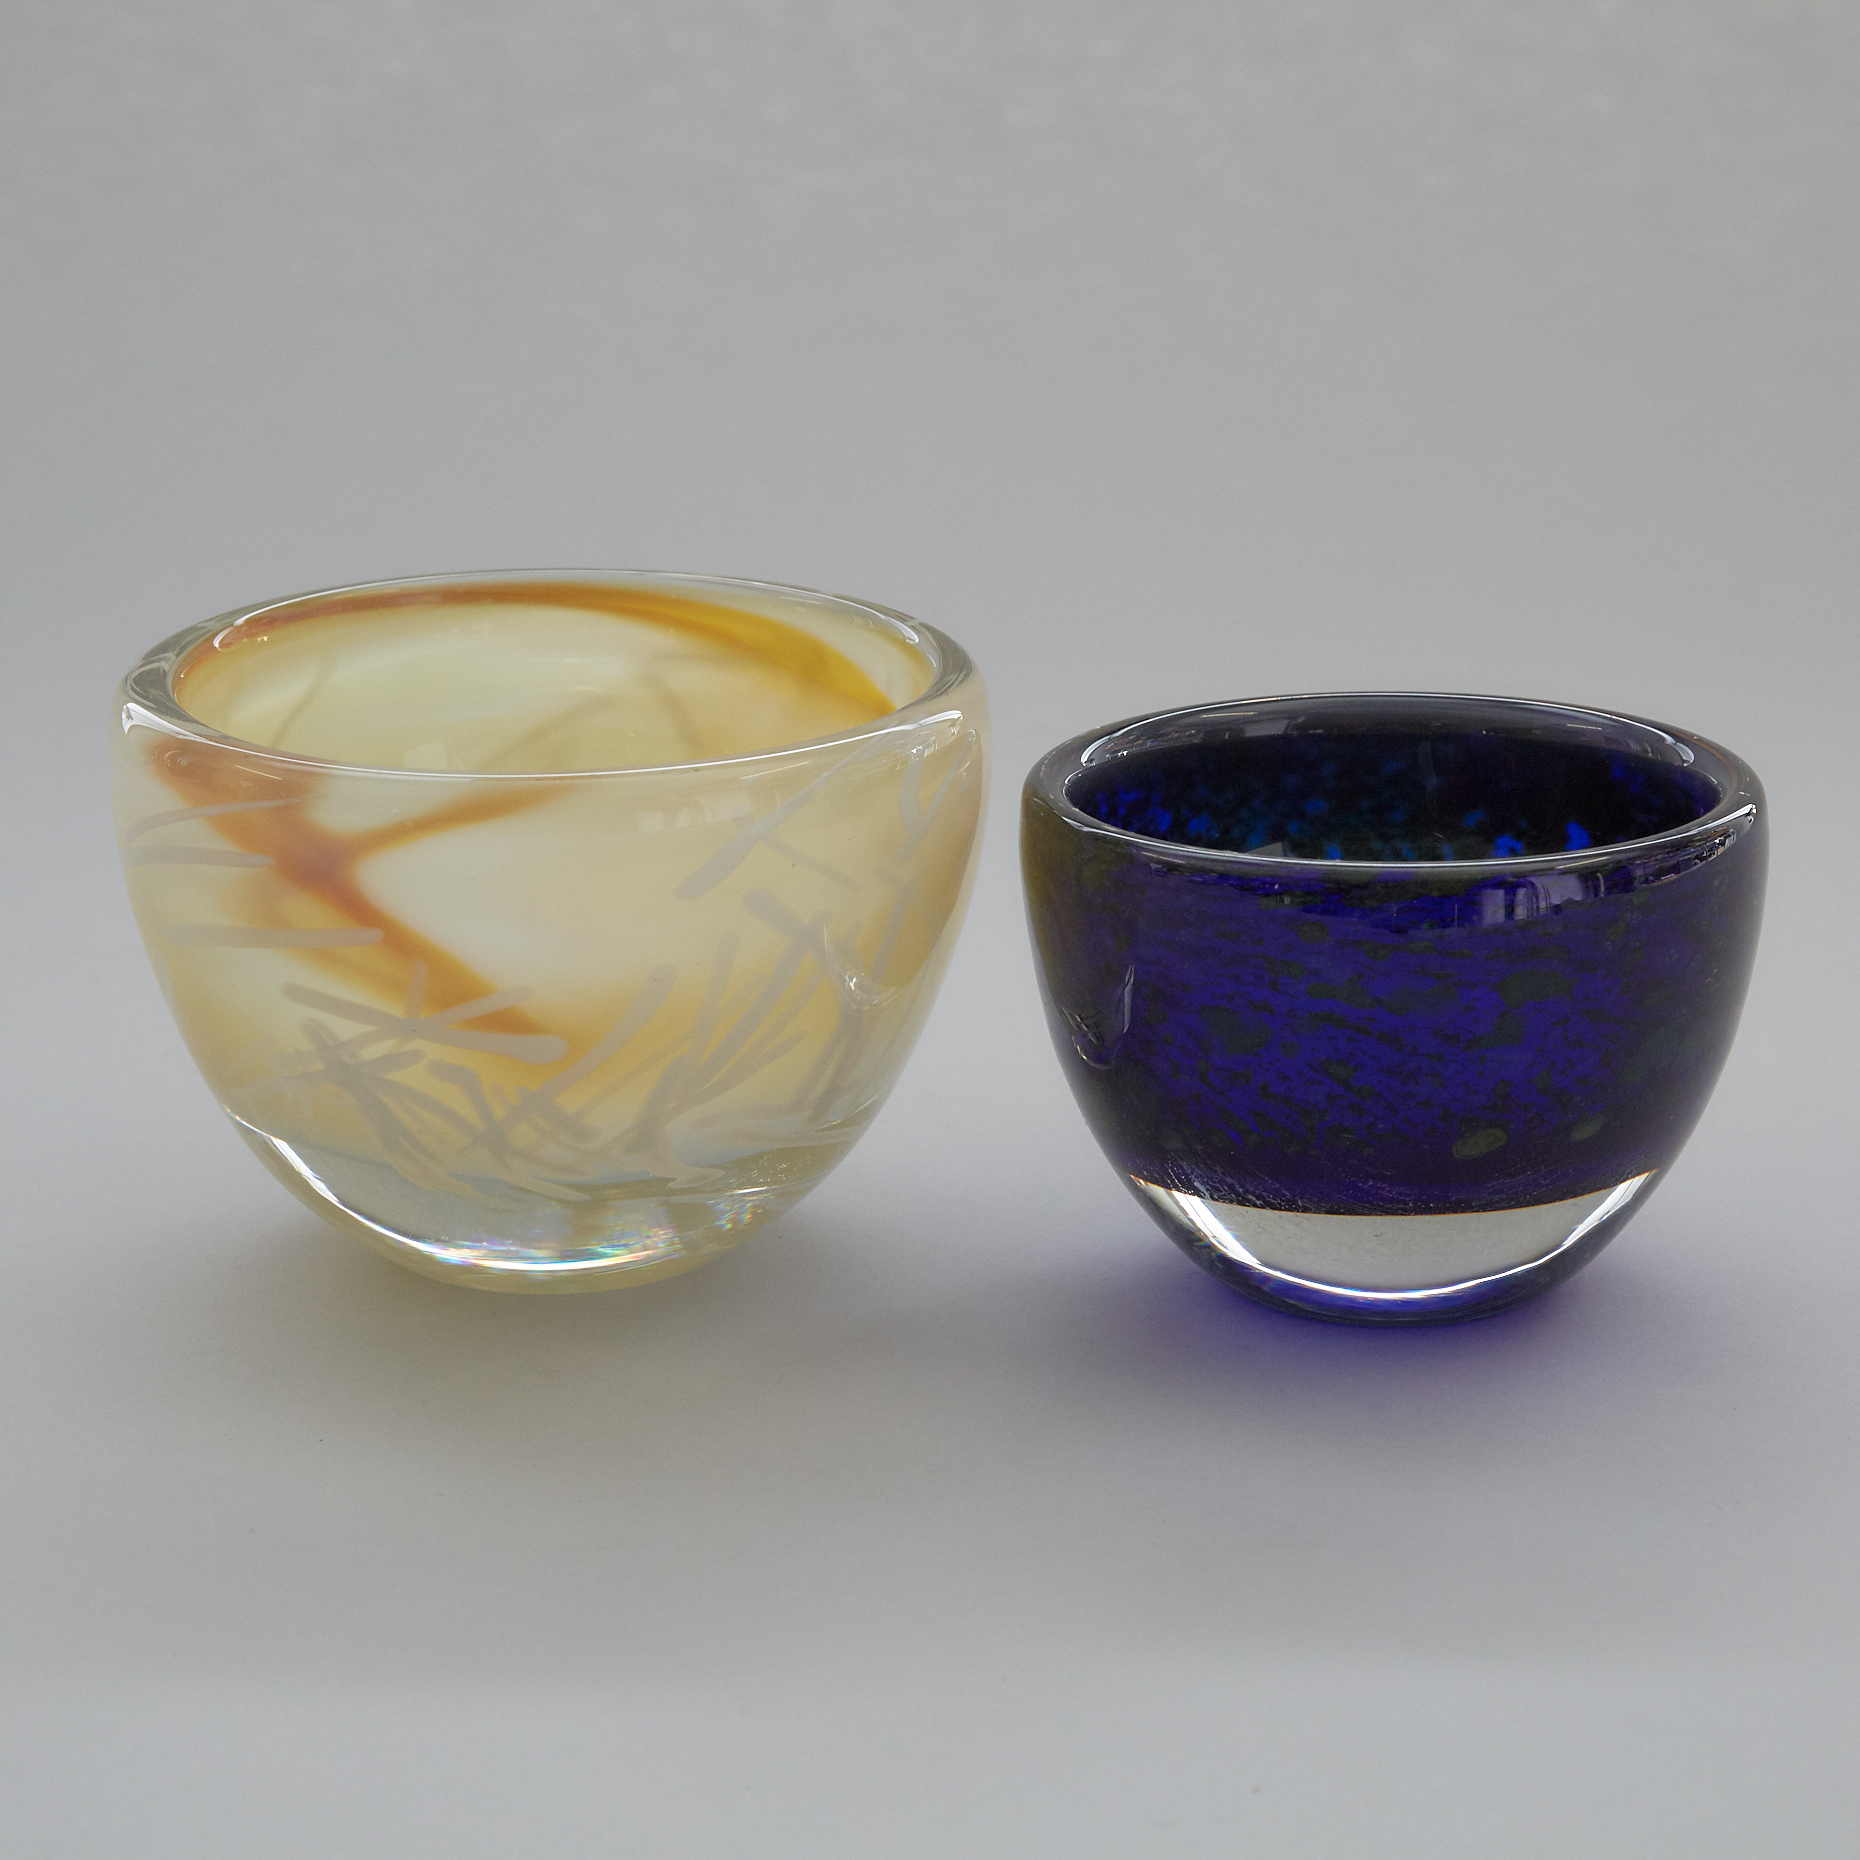 Toan Klein (American/Canadian, b.1949), Two Glass Bowls, 1978